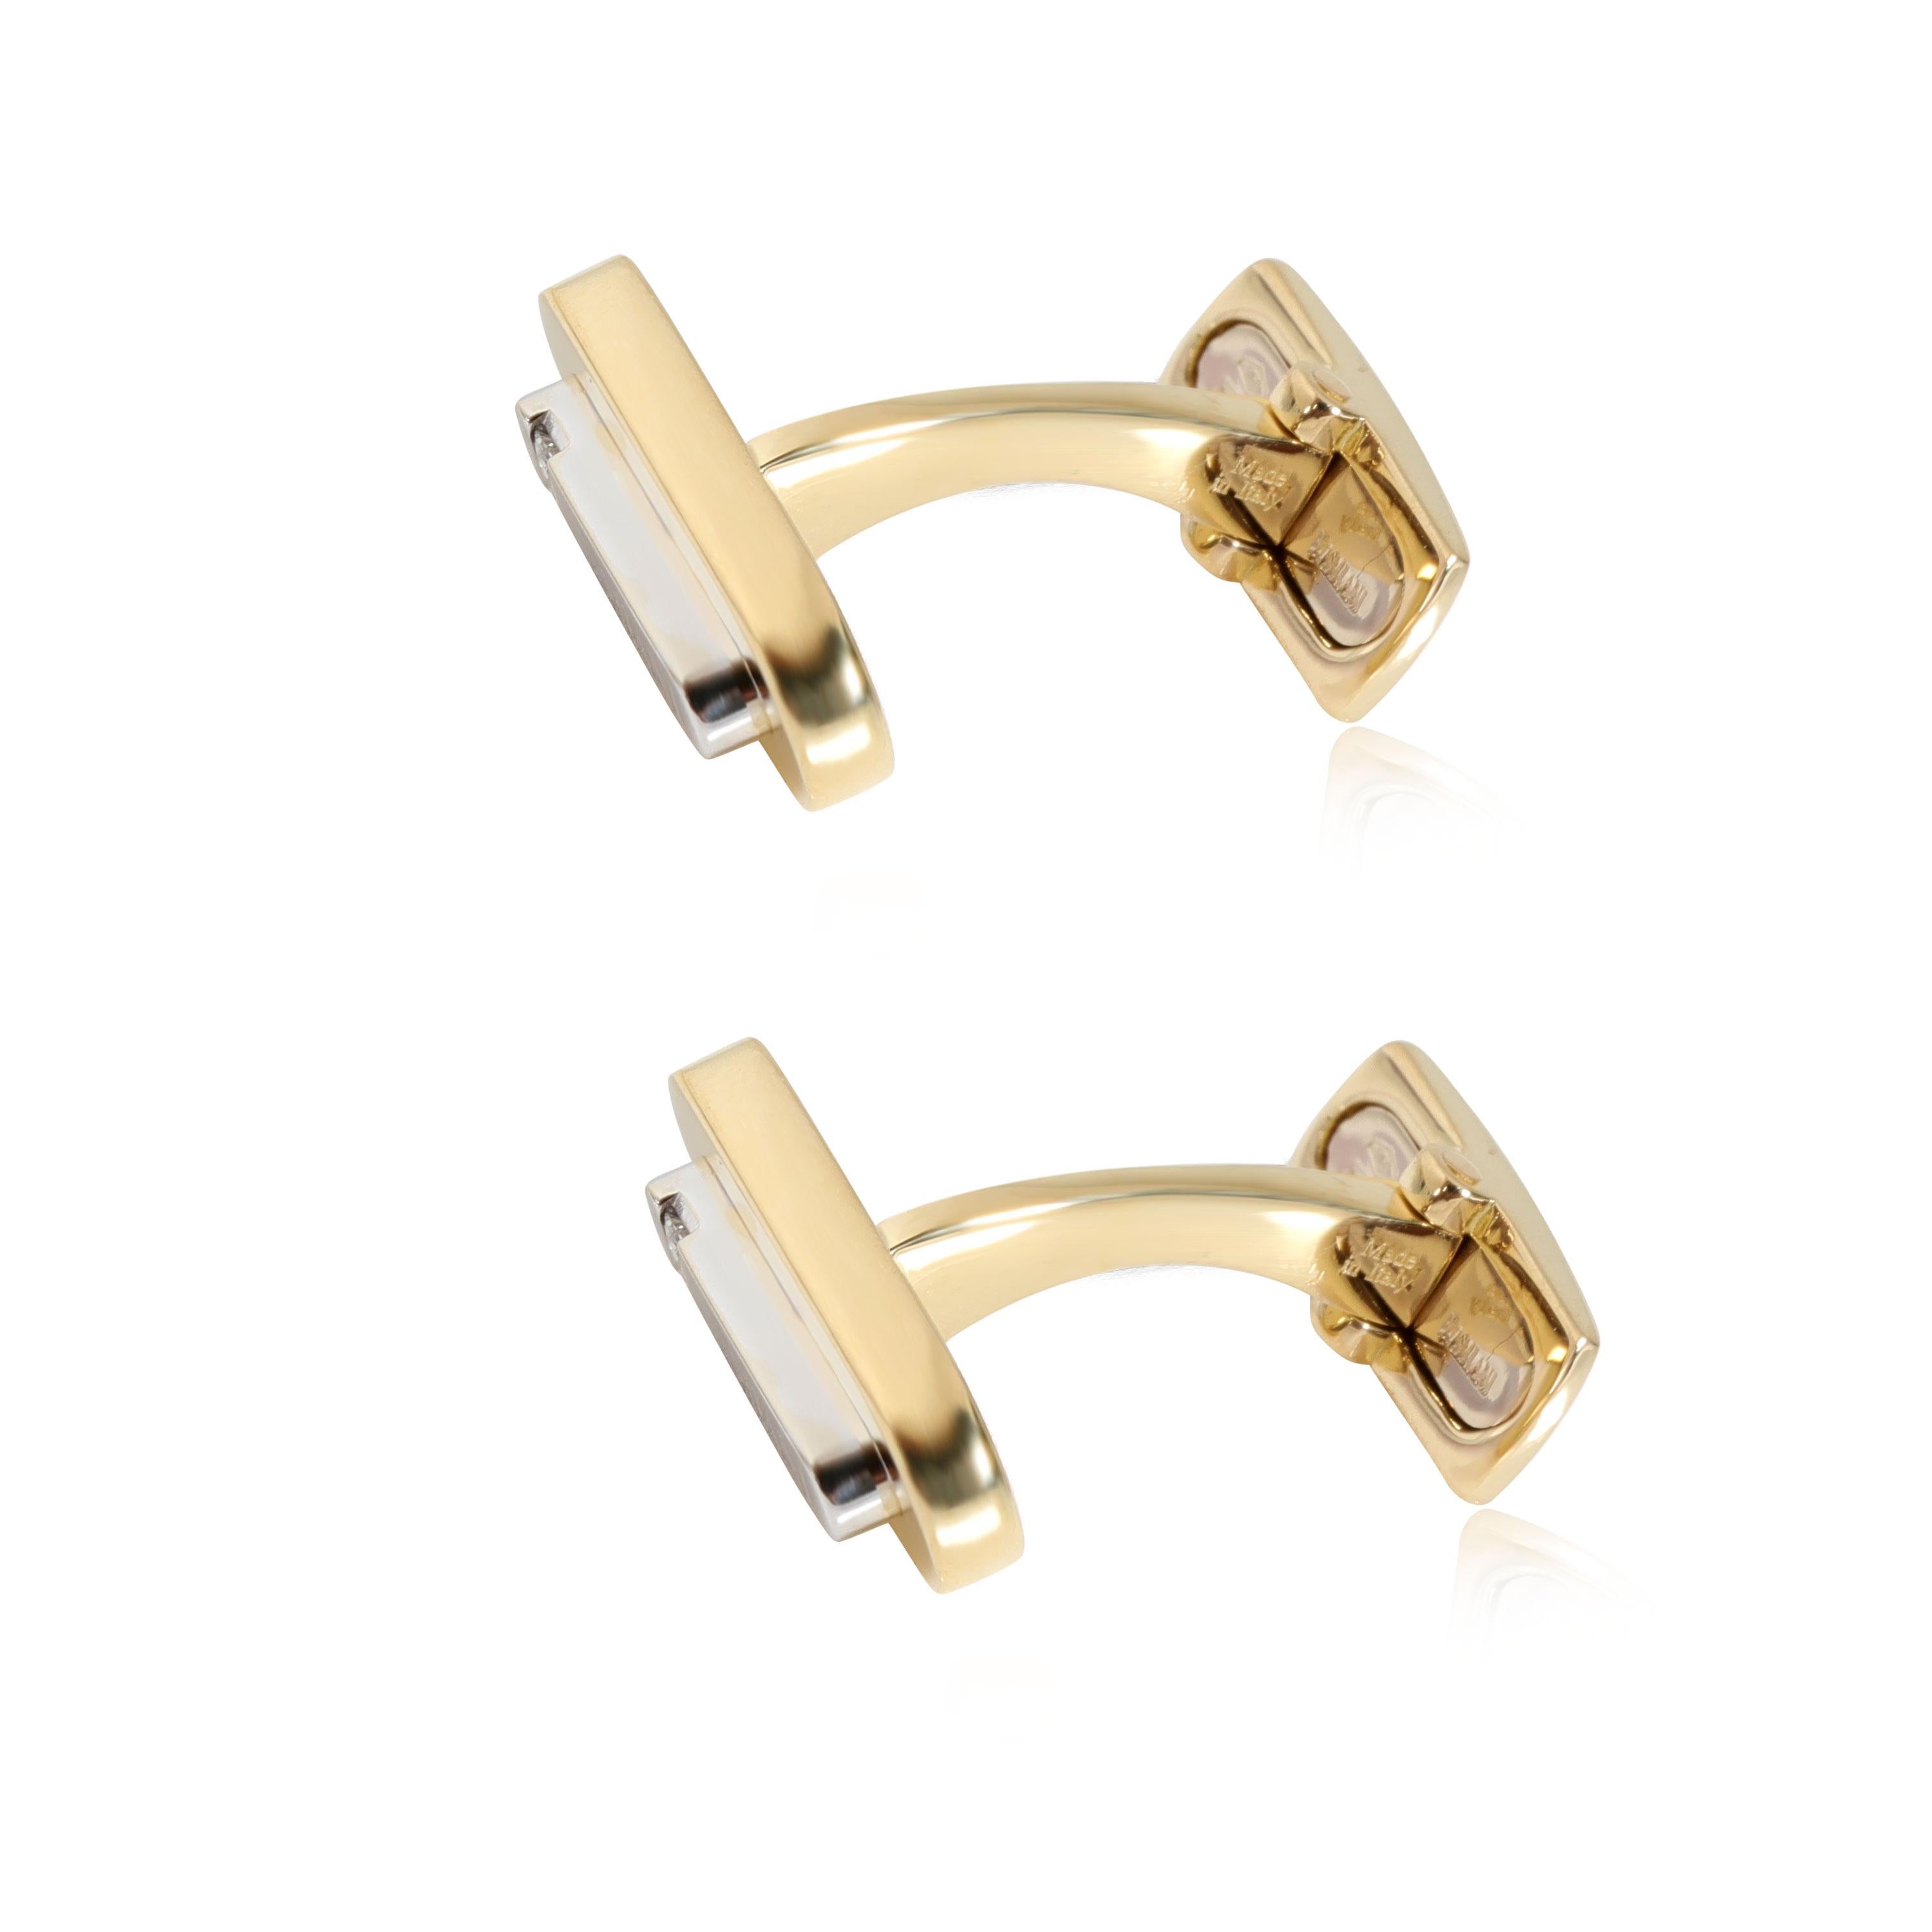 Damiani Diamond Cufflinks in 18k White Gold/Yellow Gold 0.11 CTW

PRIMARY DETAILS
SKU: 115831
Listing Title: Damiani Diamond Cufflinks in 18k White Gold/Yellow Gold 0.11 CTW
Condition Description: Retails for 4300 USD. In excellent condition and